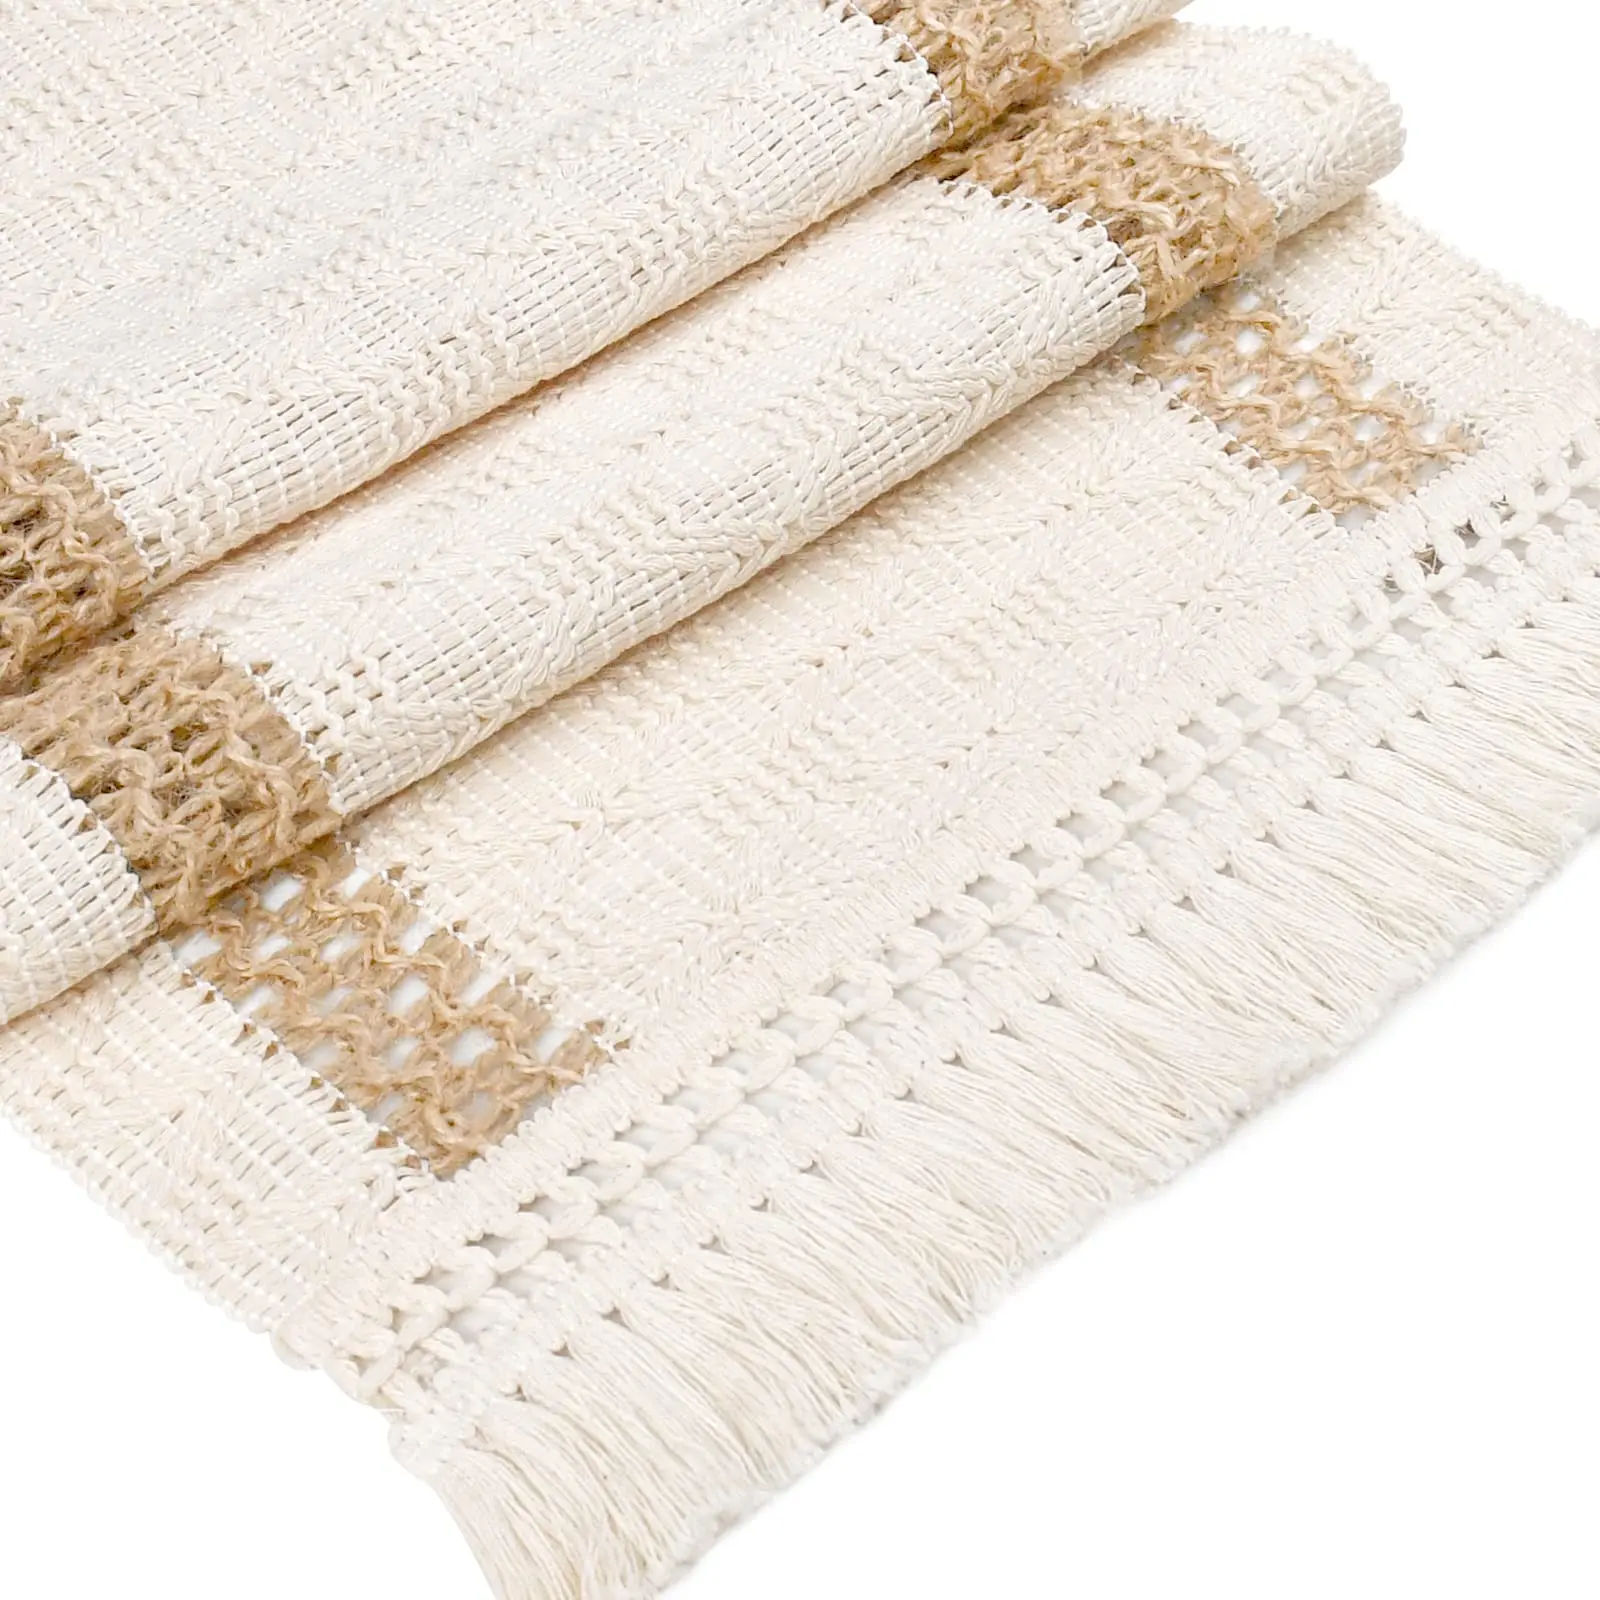 Macrame Placemats Set of 4, Cream Beige Boho Place Mats with Tassels, Hand Woven Cotton and Burlap Splicing, Rustic Placemats